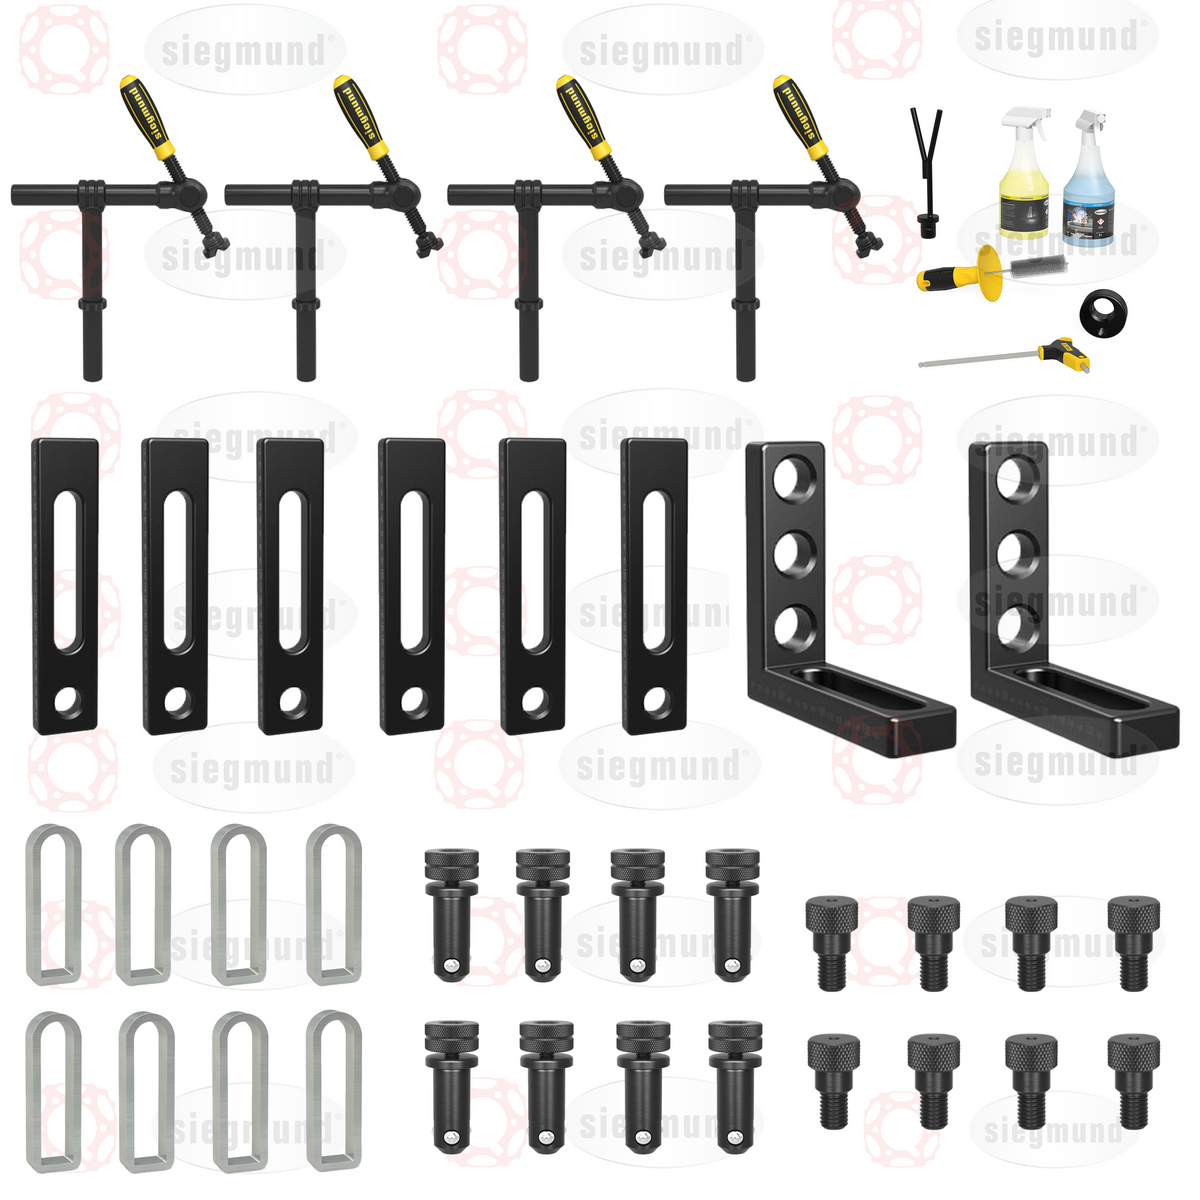 4-281200: Set 1: 42 Piece Accessory Kit for the System 28 Basic Series Welding Tables